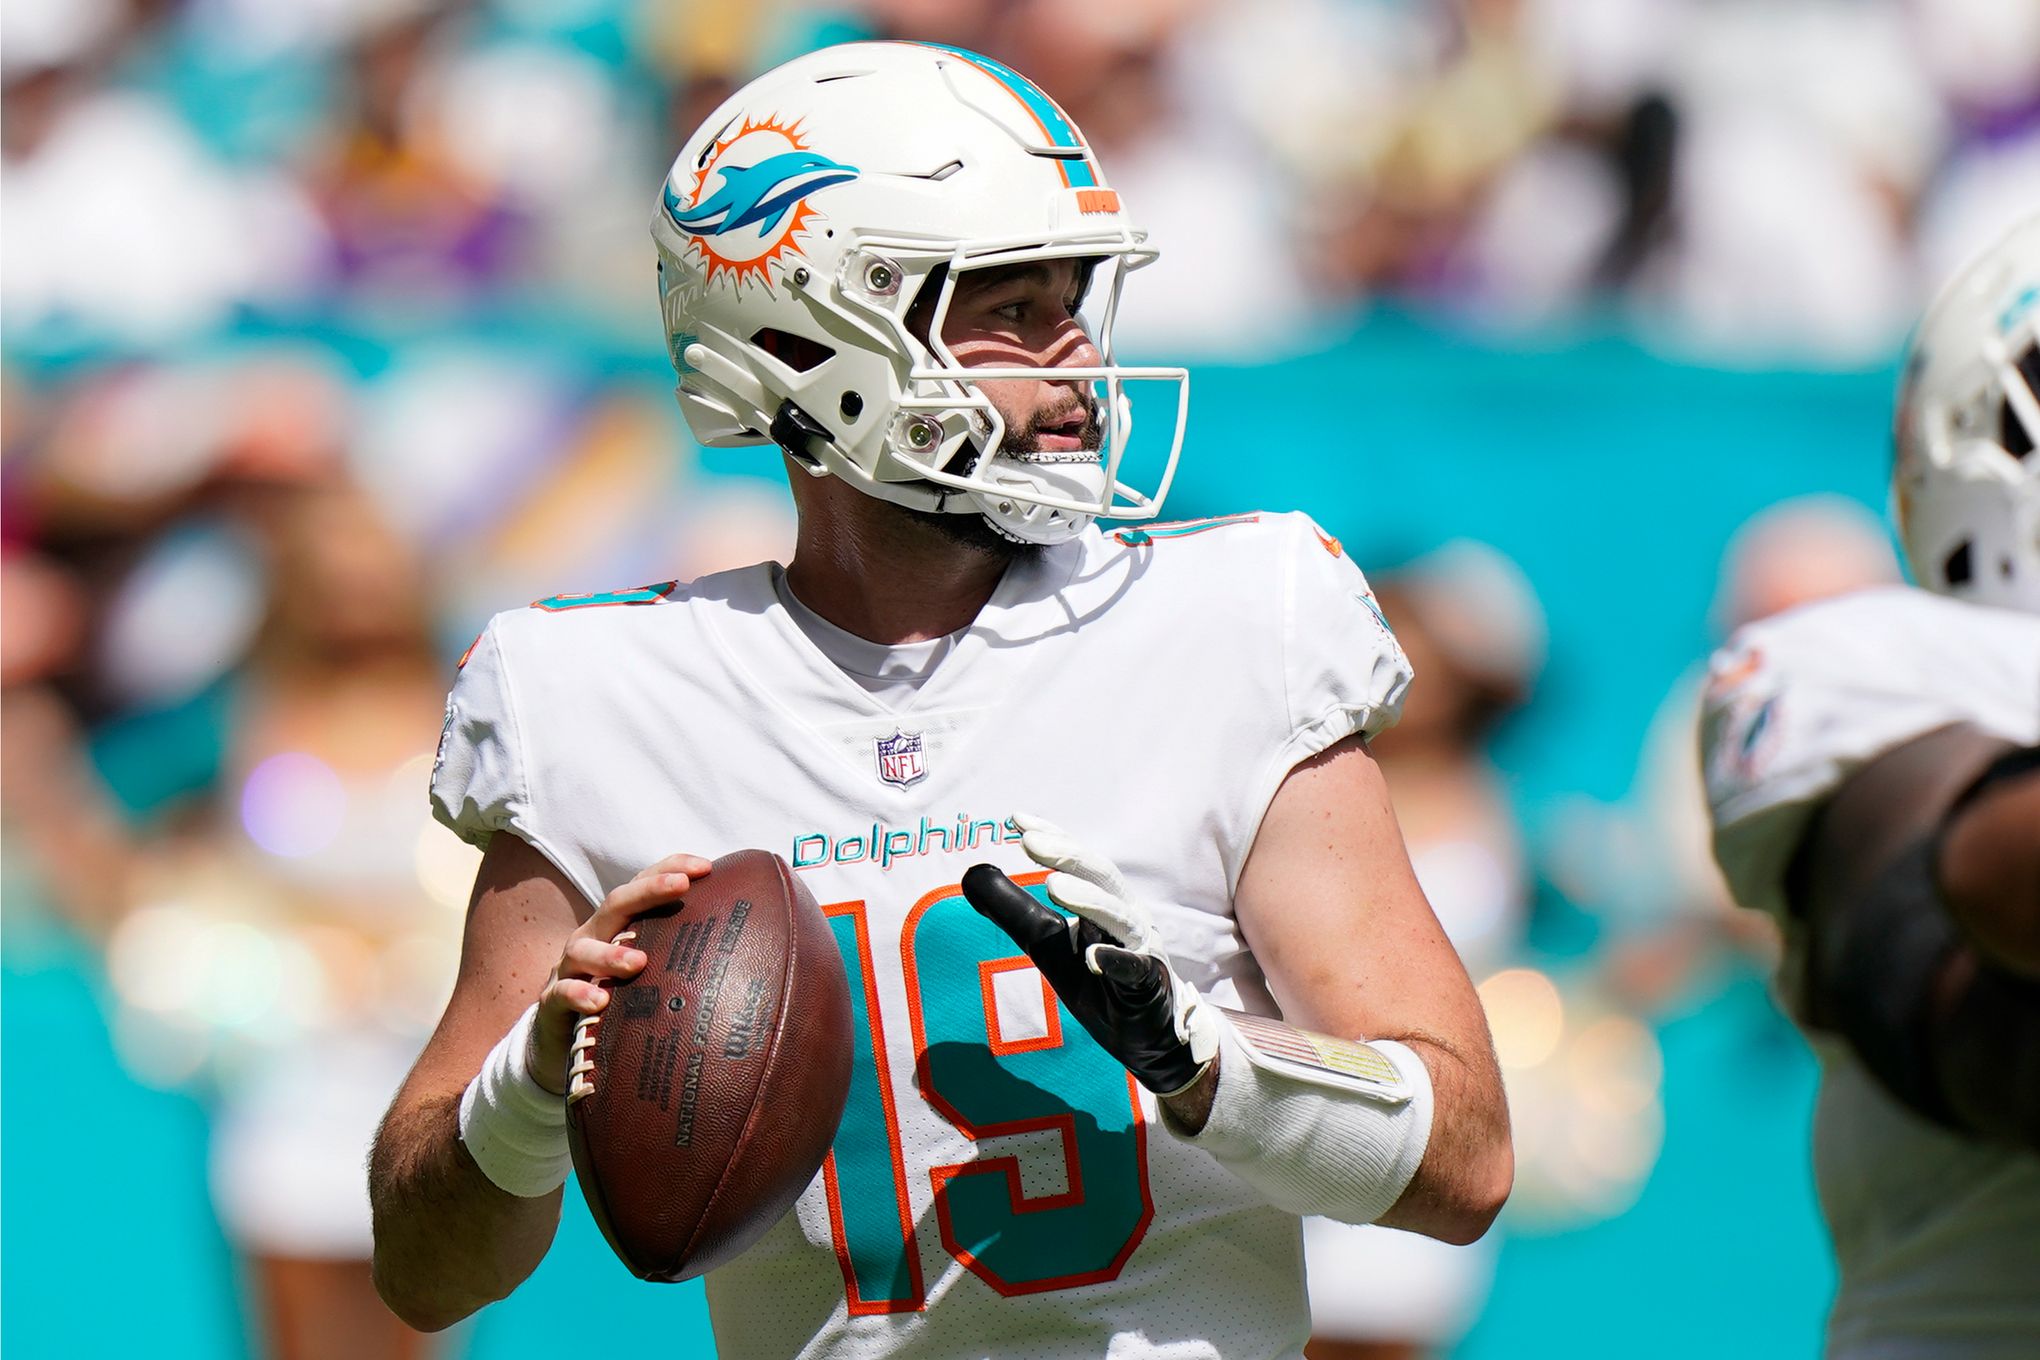 Miami Dolphins lose to Jets as Teddy Bridgewater lasts one play